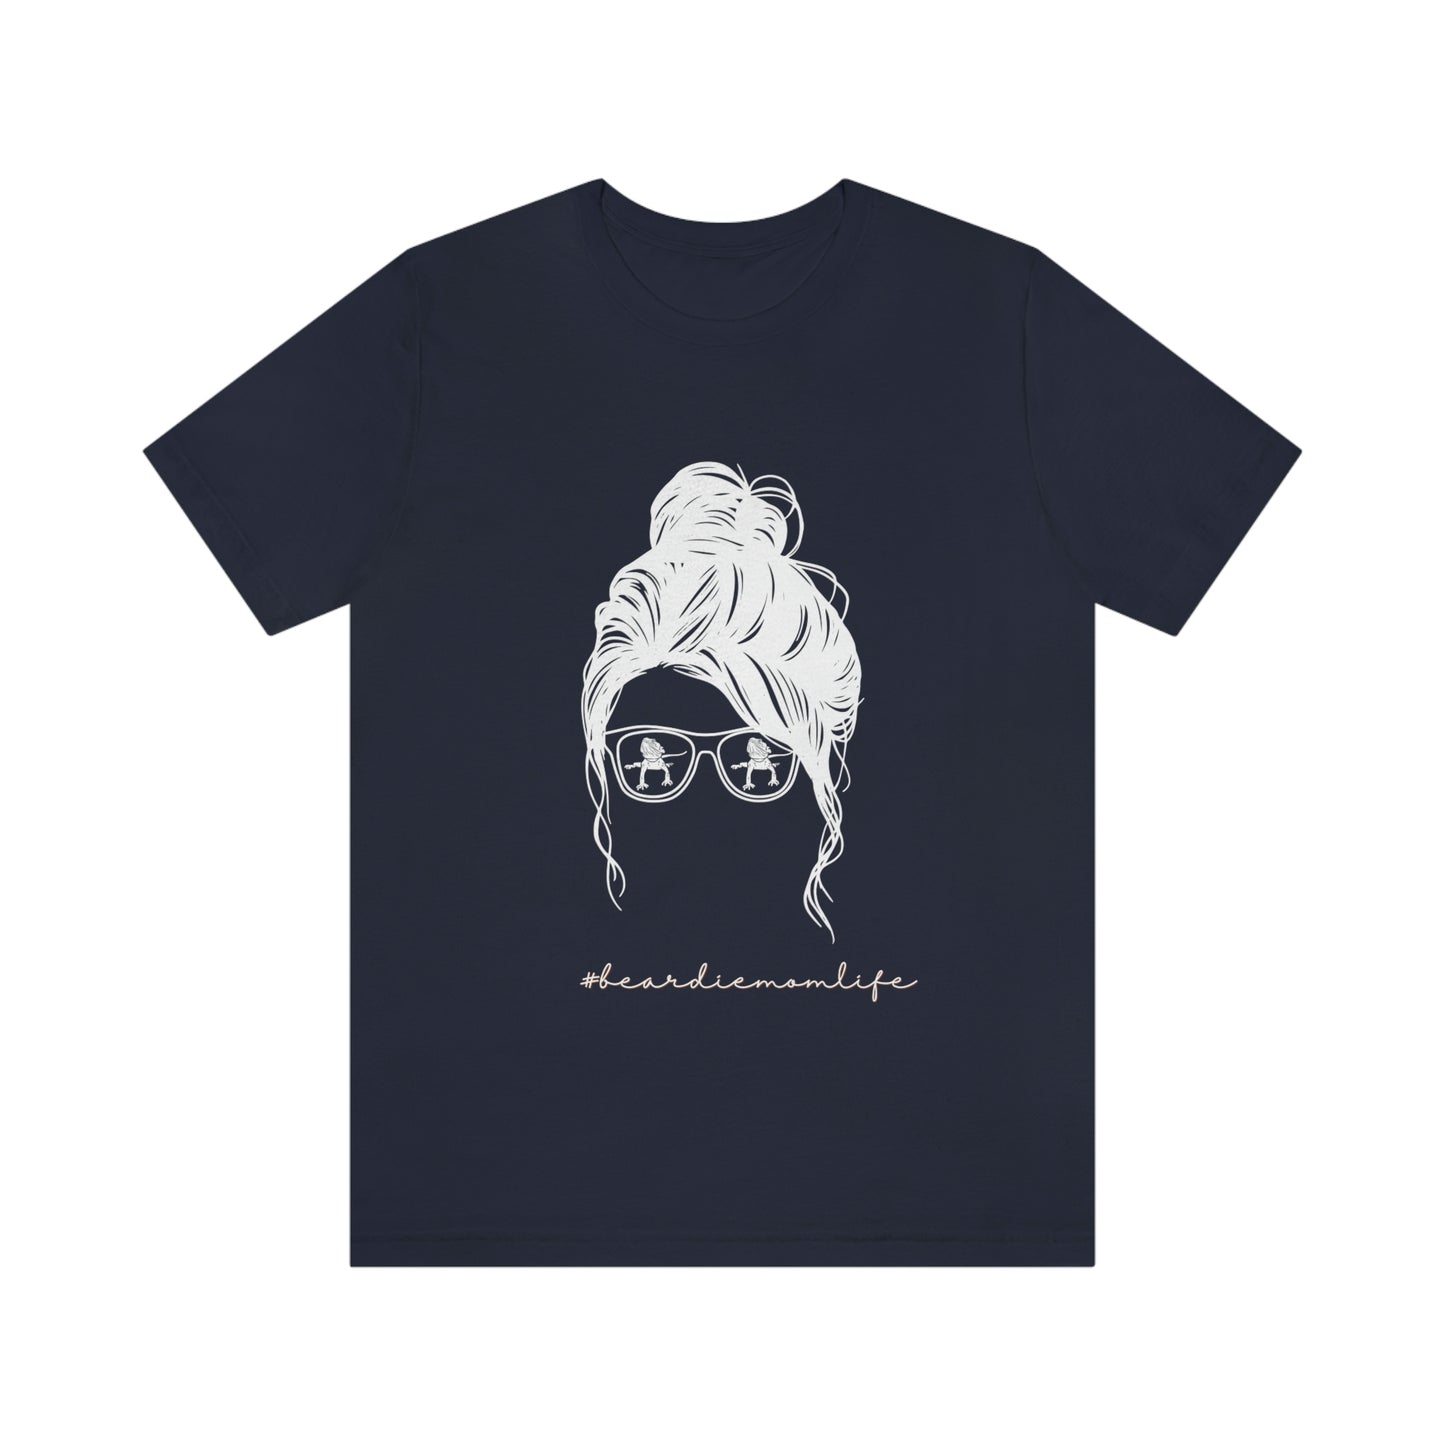 Beardie Mom Life T shirt for the Bearded dragon loving mom in your life! Reptile loving mother's day gift